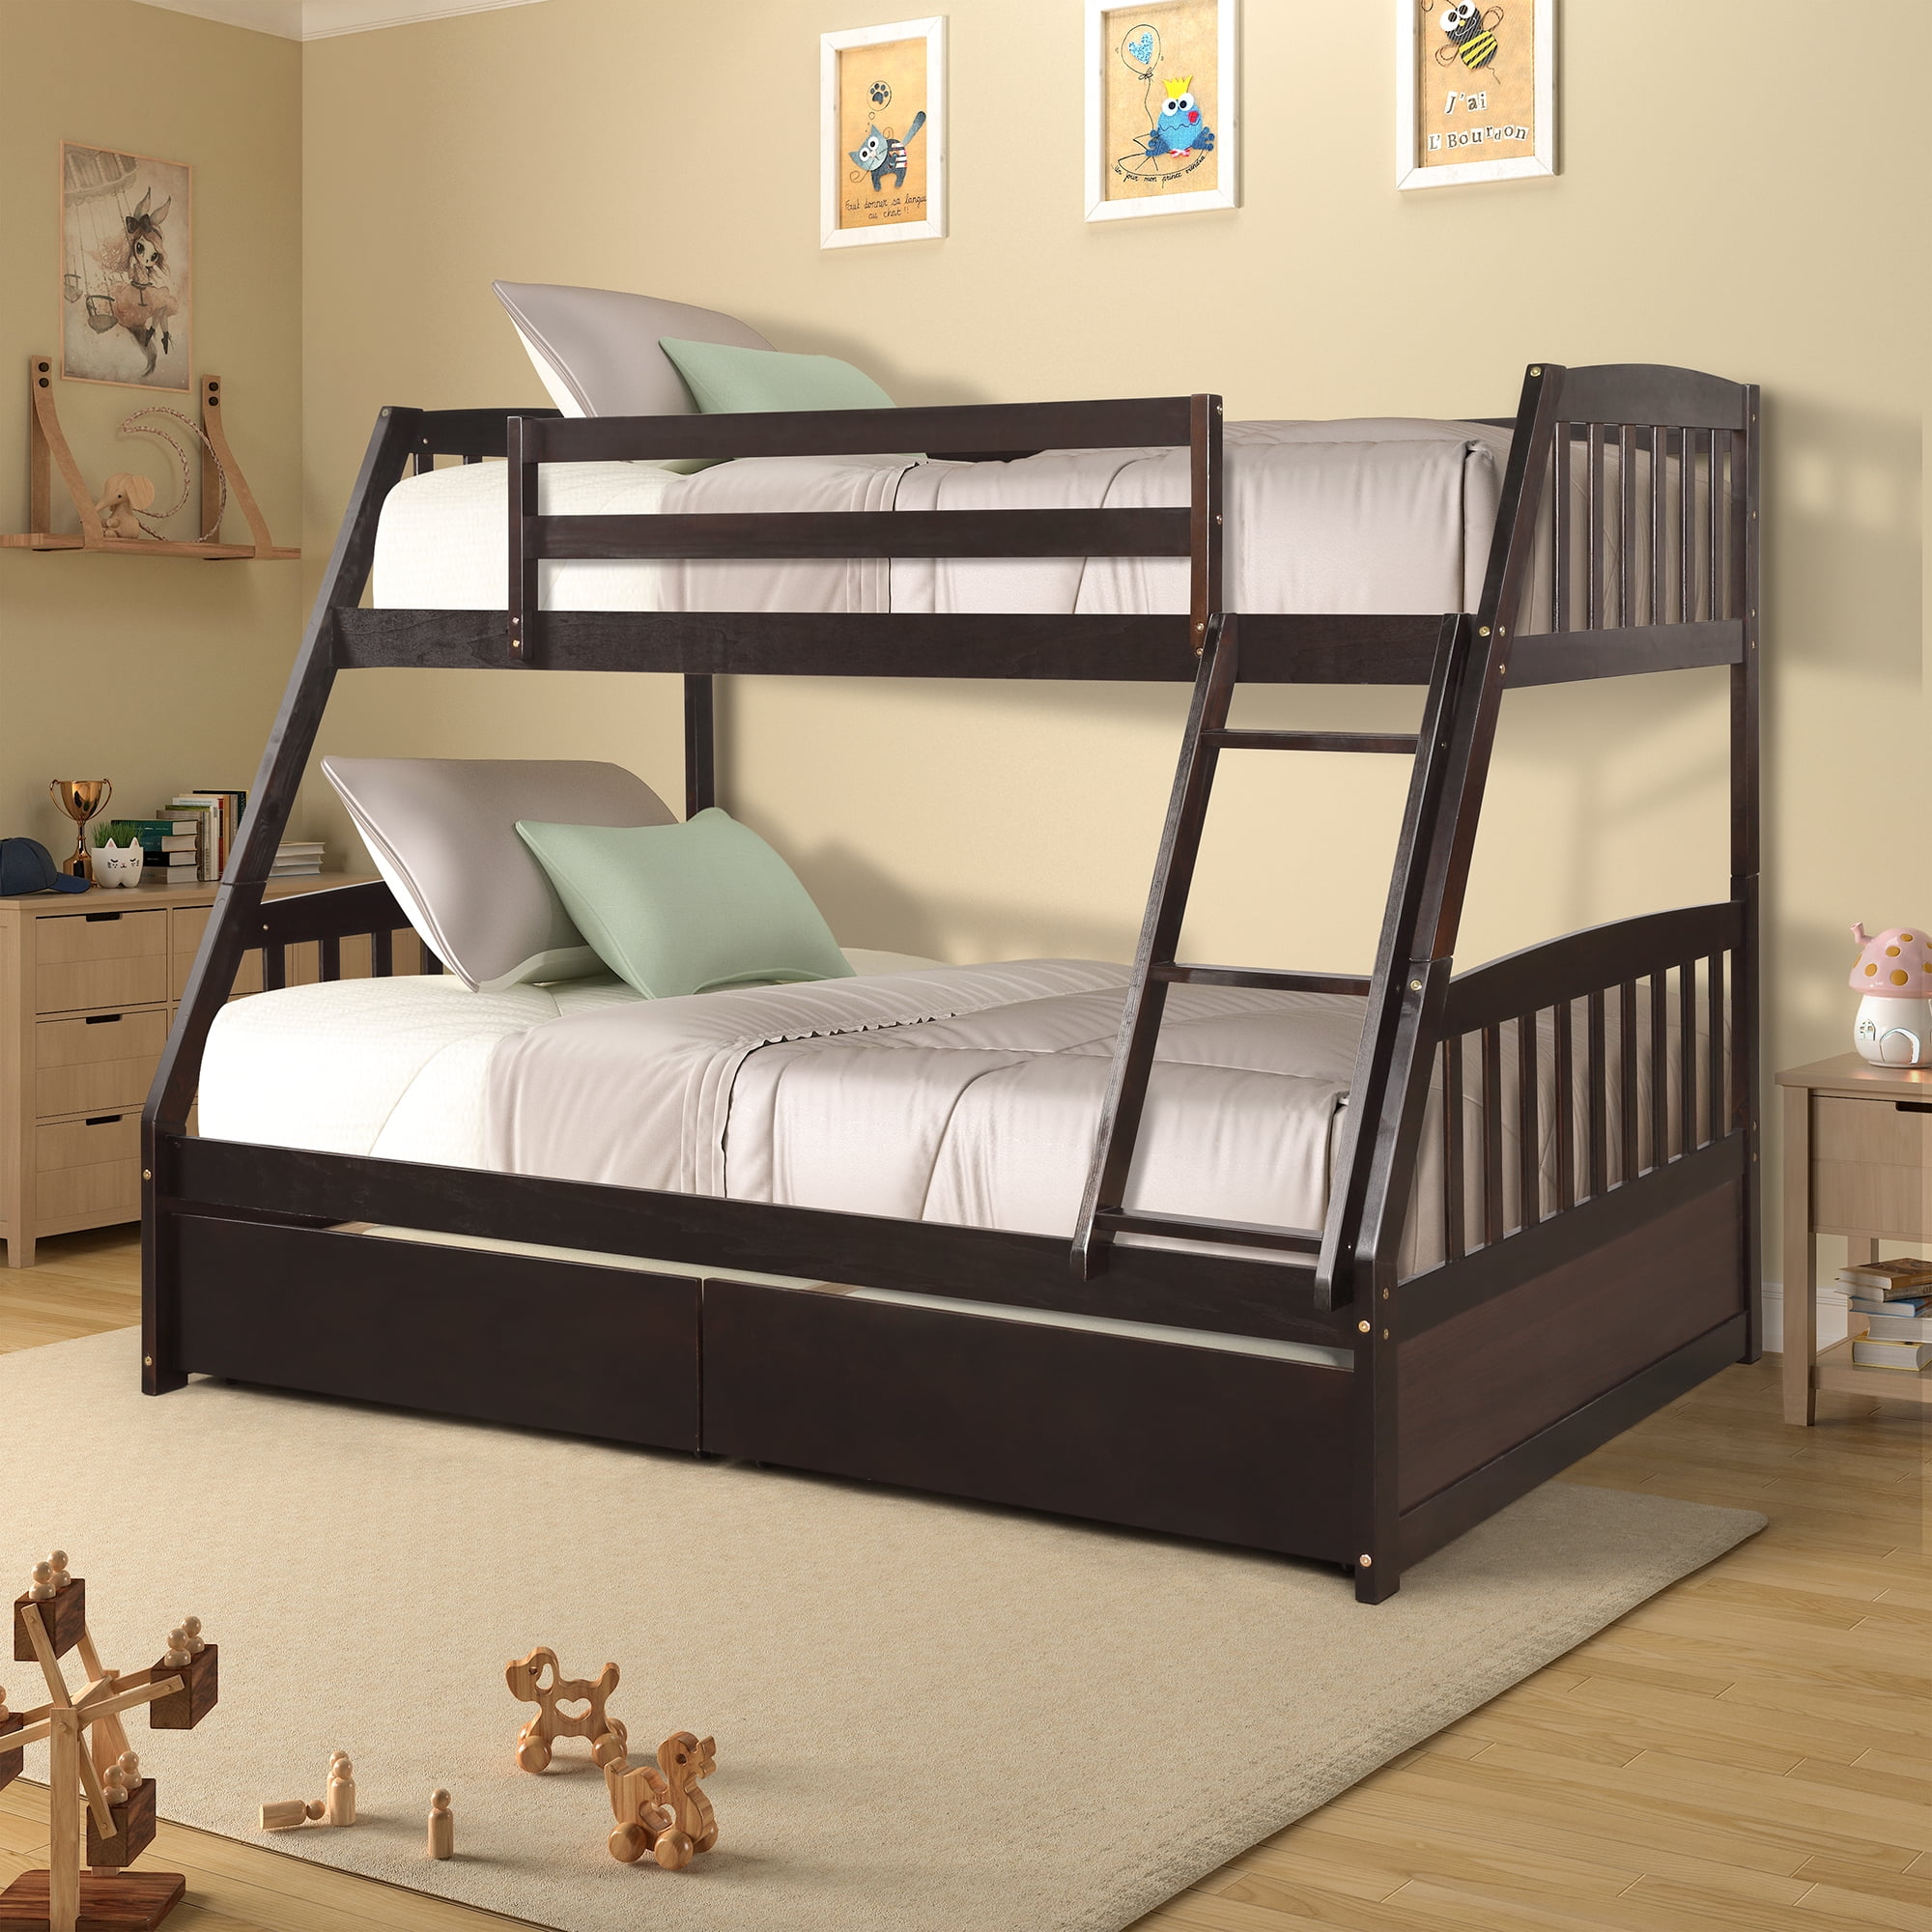 Wood Bunk Beds With Drawers Twin Over, Bunk Beds For Teen Boys